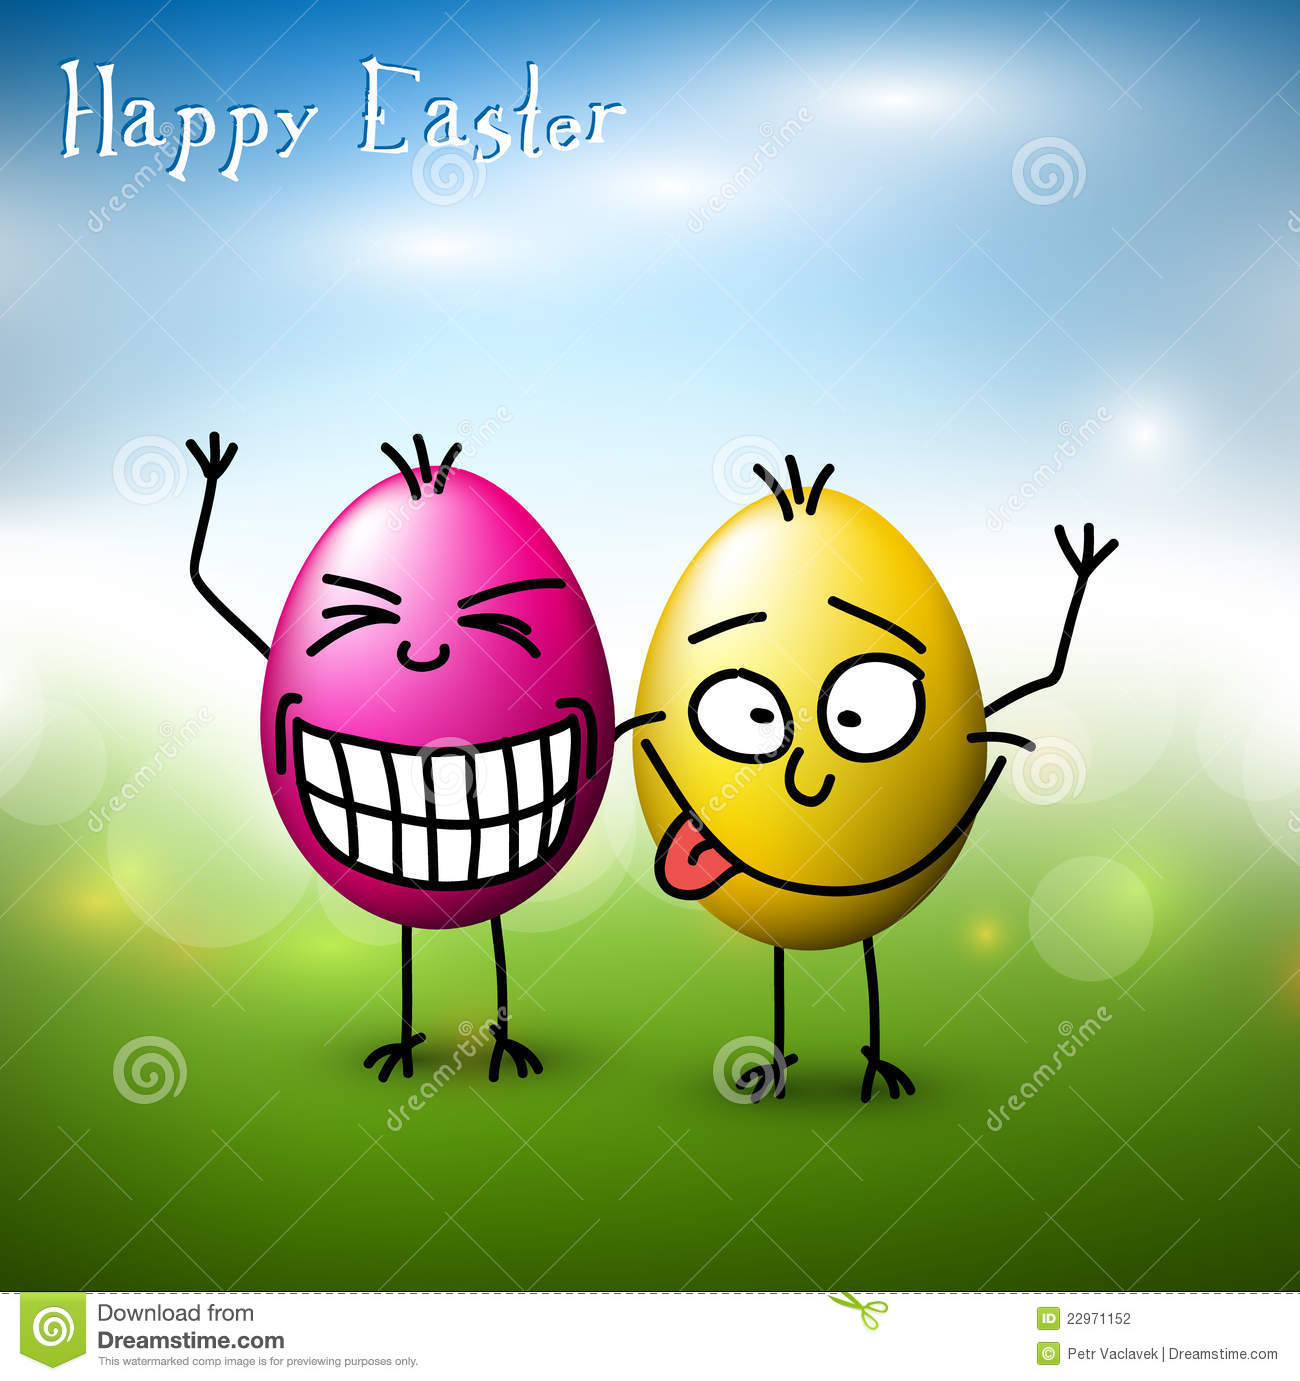 Funny Happy Easter Picture